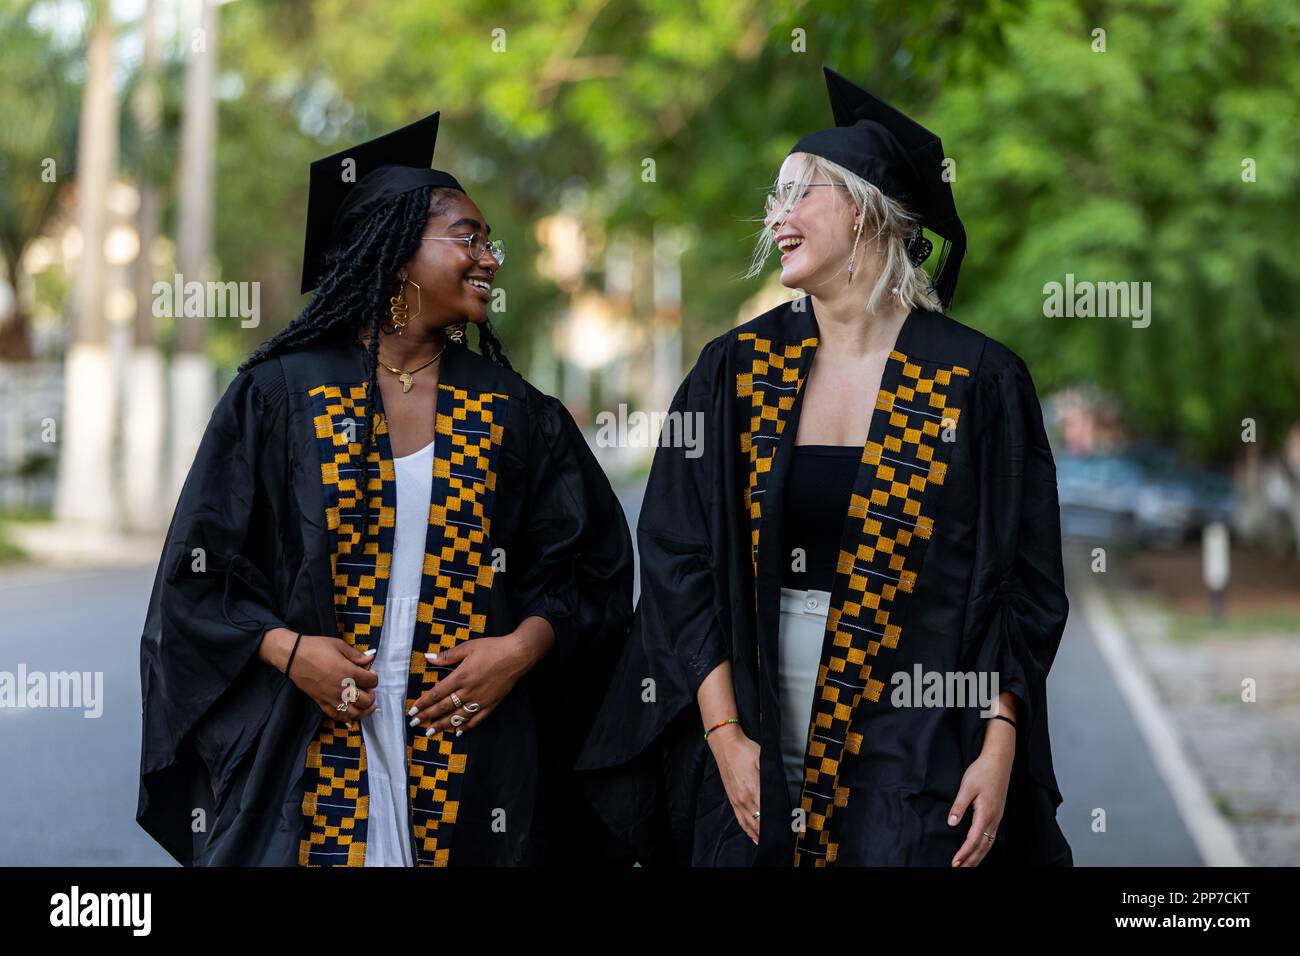 Multiracial, Black and Caucasian Female University Graduates wearing gowns and caps, share a joke on their way to graduation ceremony. Stock Photo